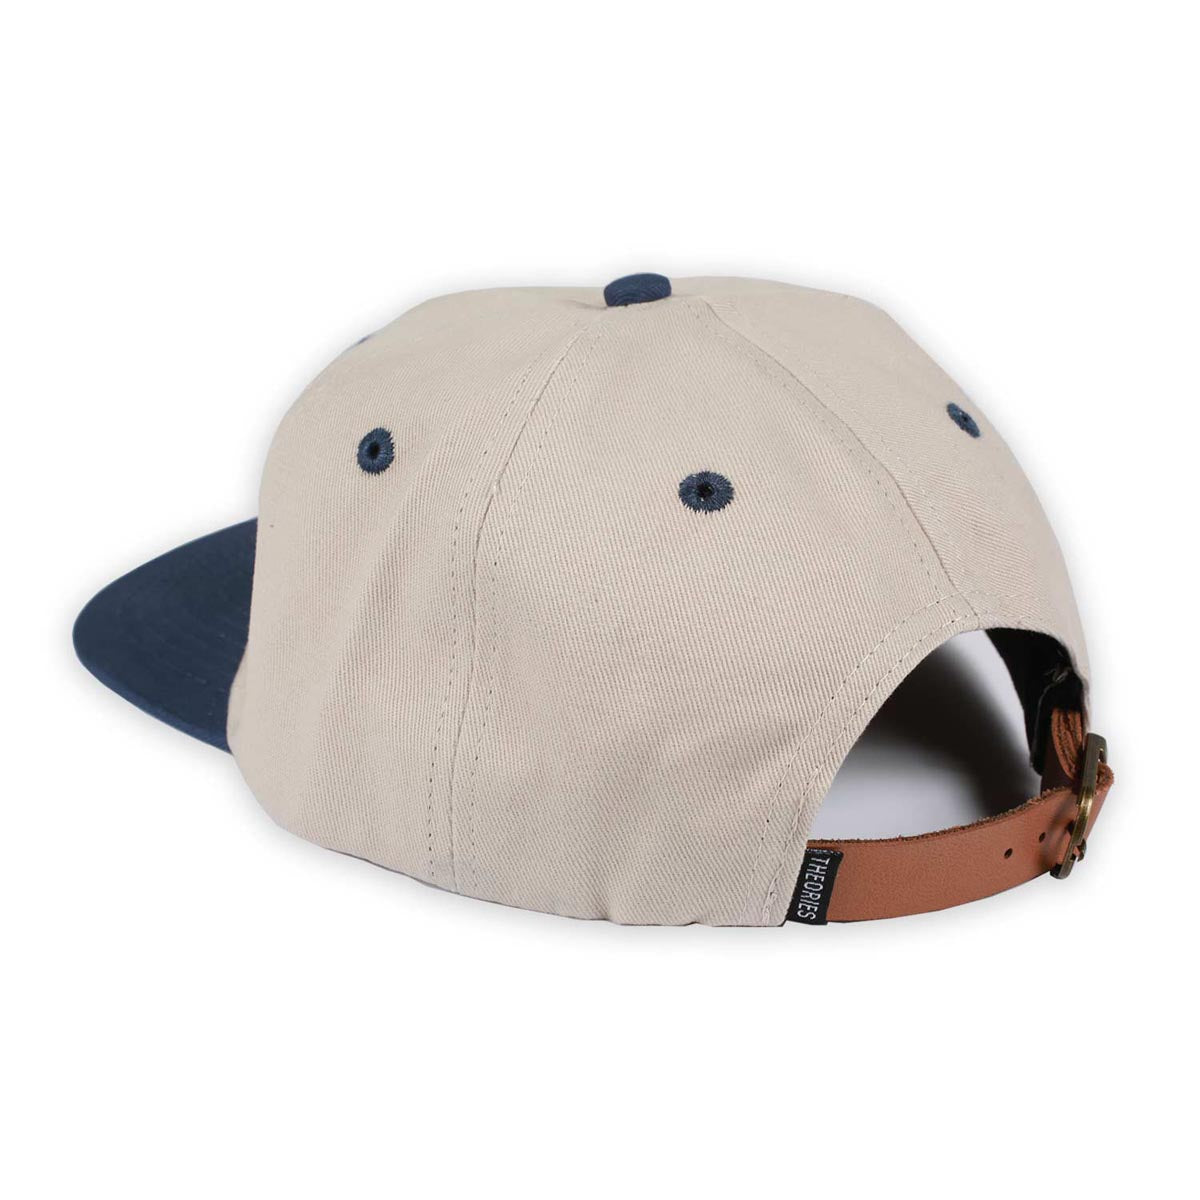 Theories New Generation Hat - Ivory/Slate Blue image 2